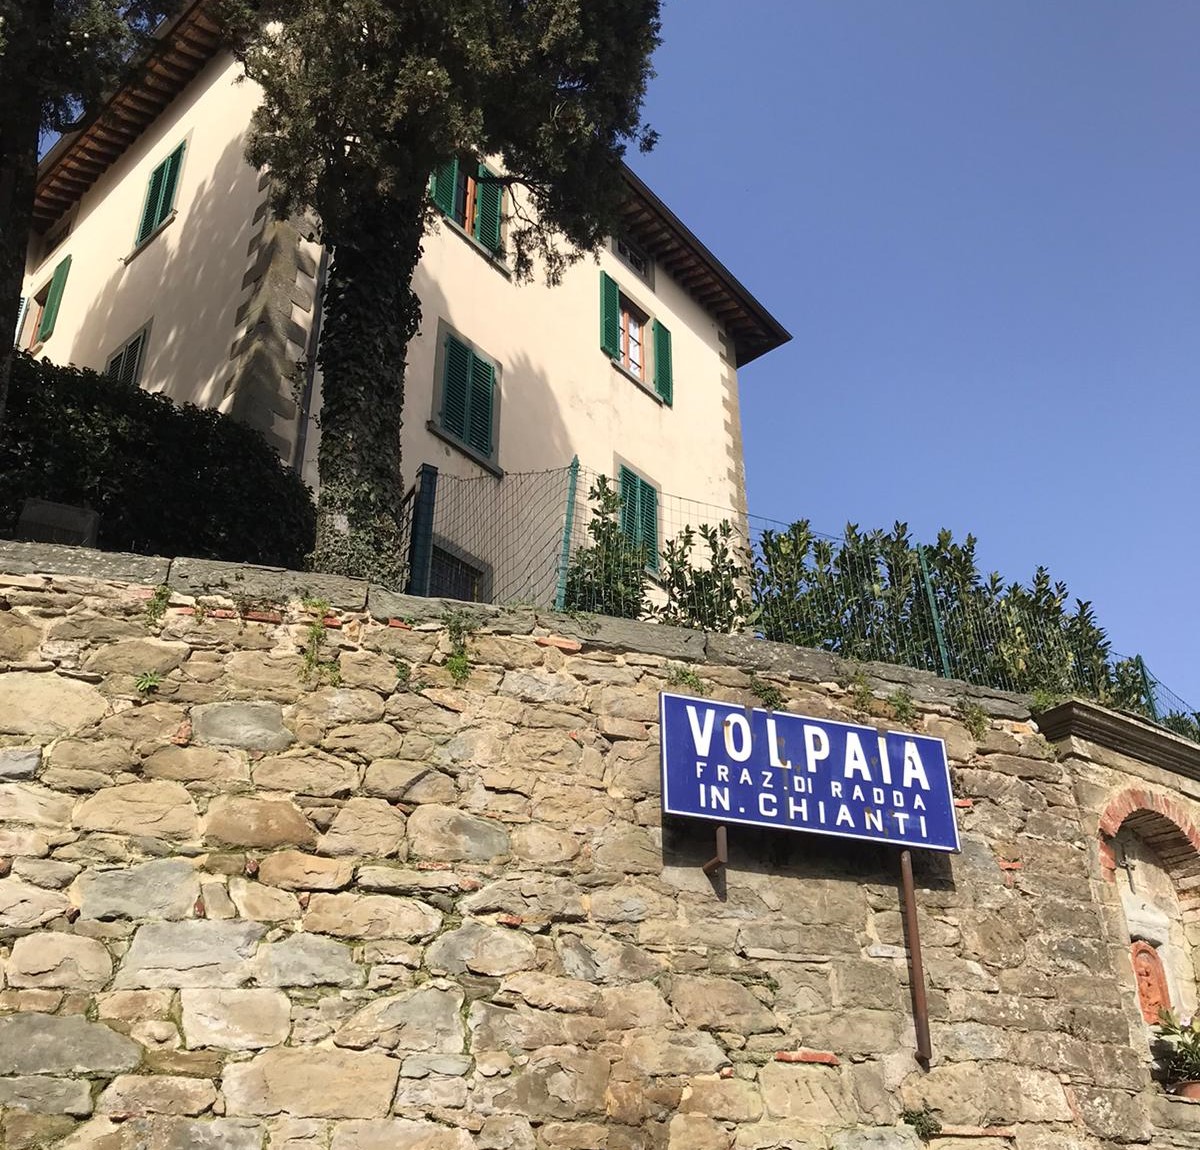 Volpaia: a small village, a fascinating history